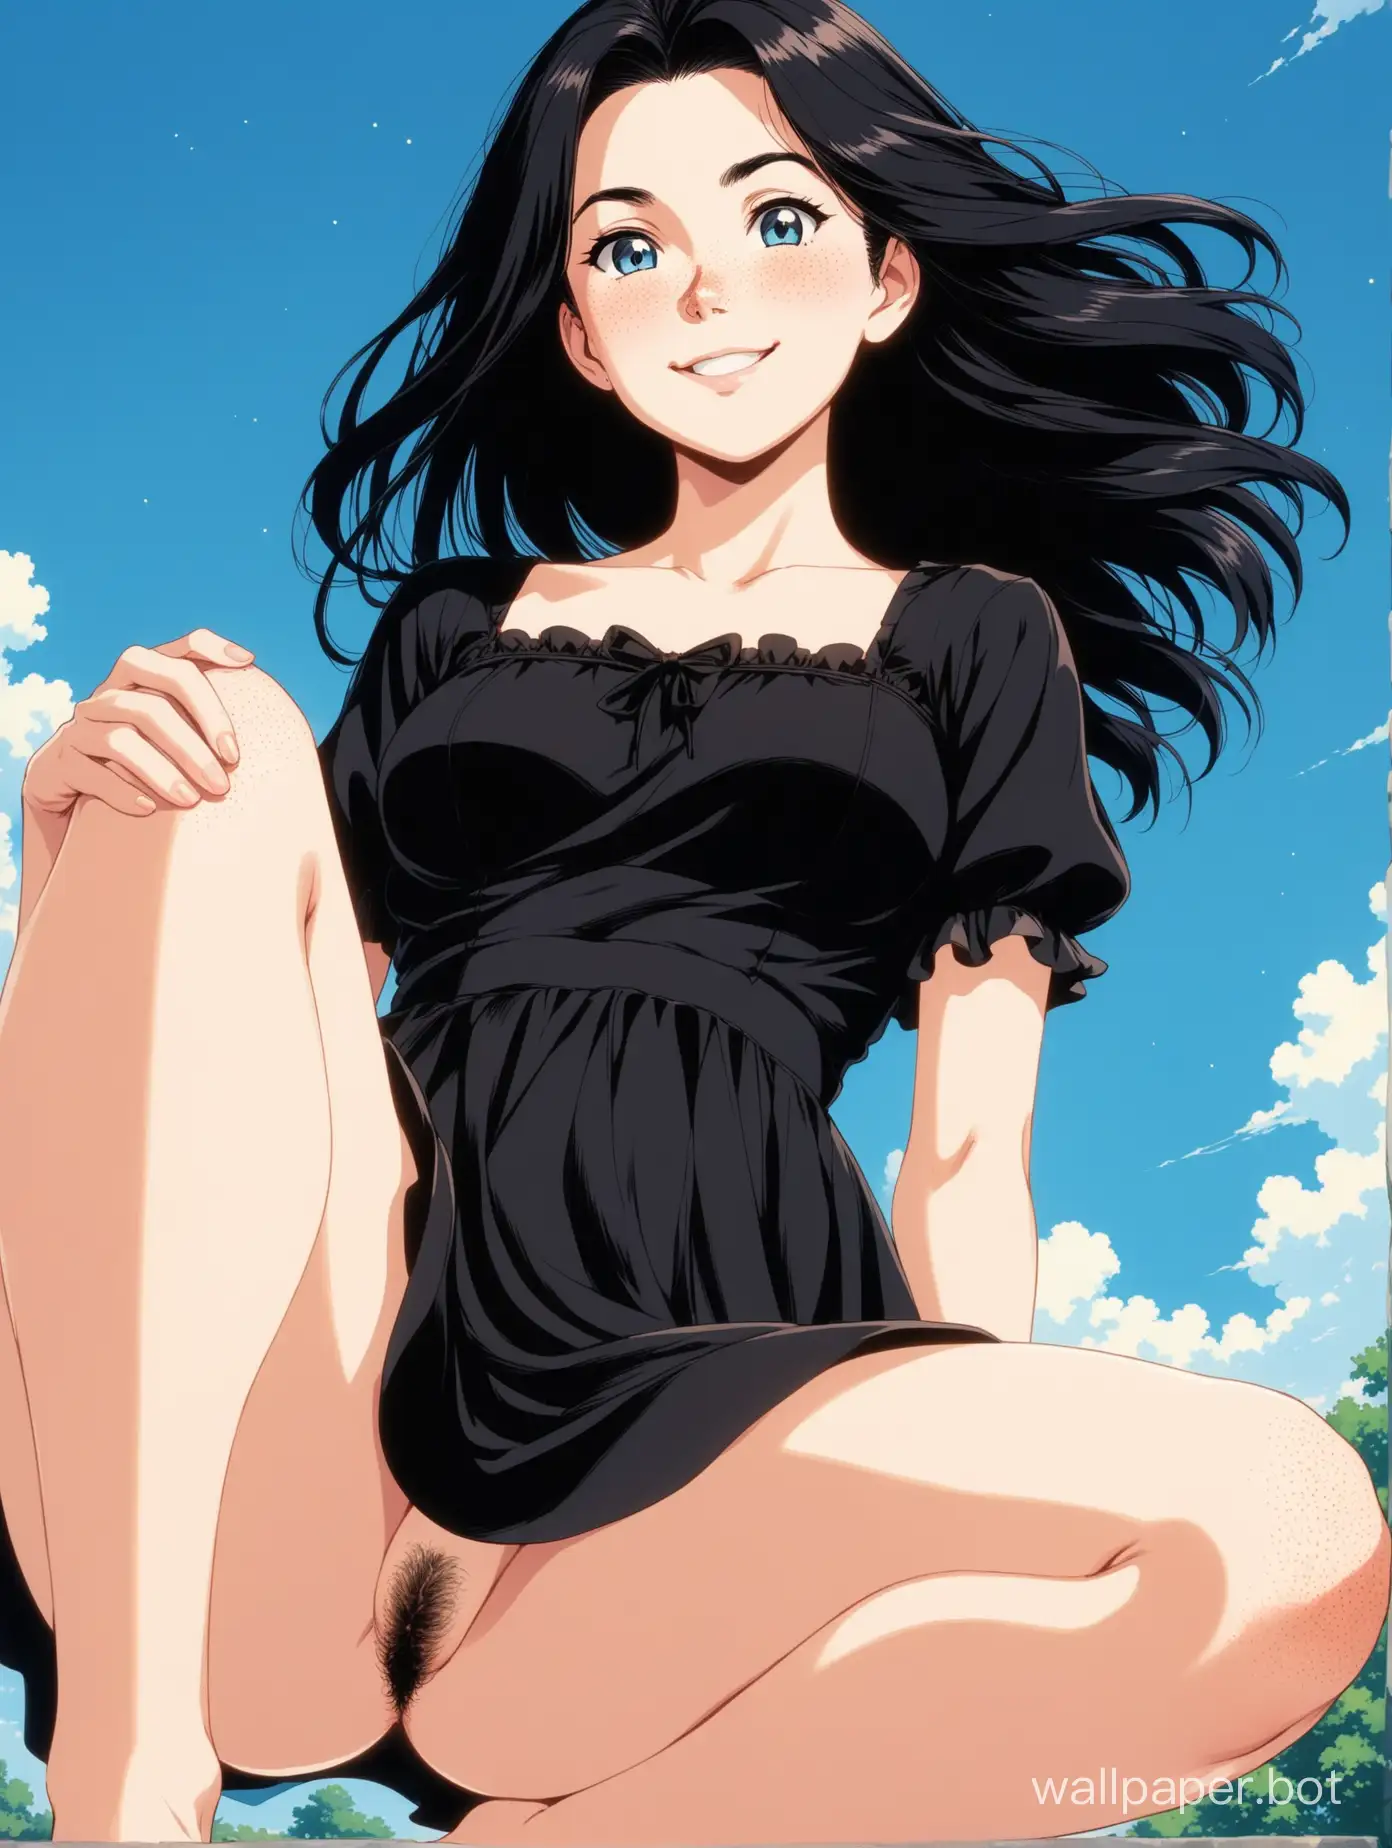 view from below, upskirt, american countryside background, a beautiful 18 year old white woman, mature face, goth girl, she is pretty, she has blue eyes, she has pale skin, she has lots of freckles, she has long jet-black hair that is wavy and parted in the middle, black sundress, big pale thighs, naked underneath, fluffy black pubic hair,  skinny, smiling, beaming, mature face, perfect, sense of wonder, retro 1980s anime